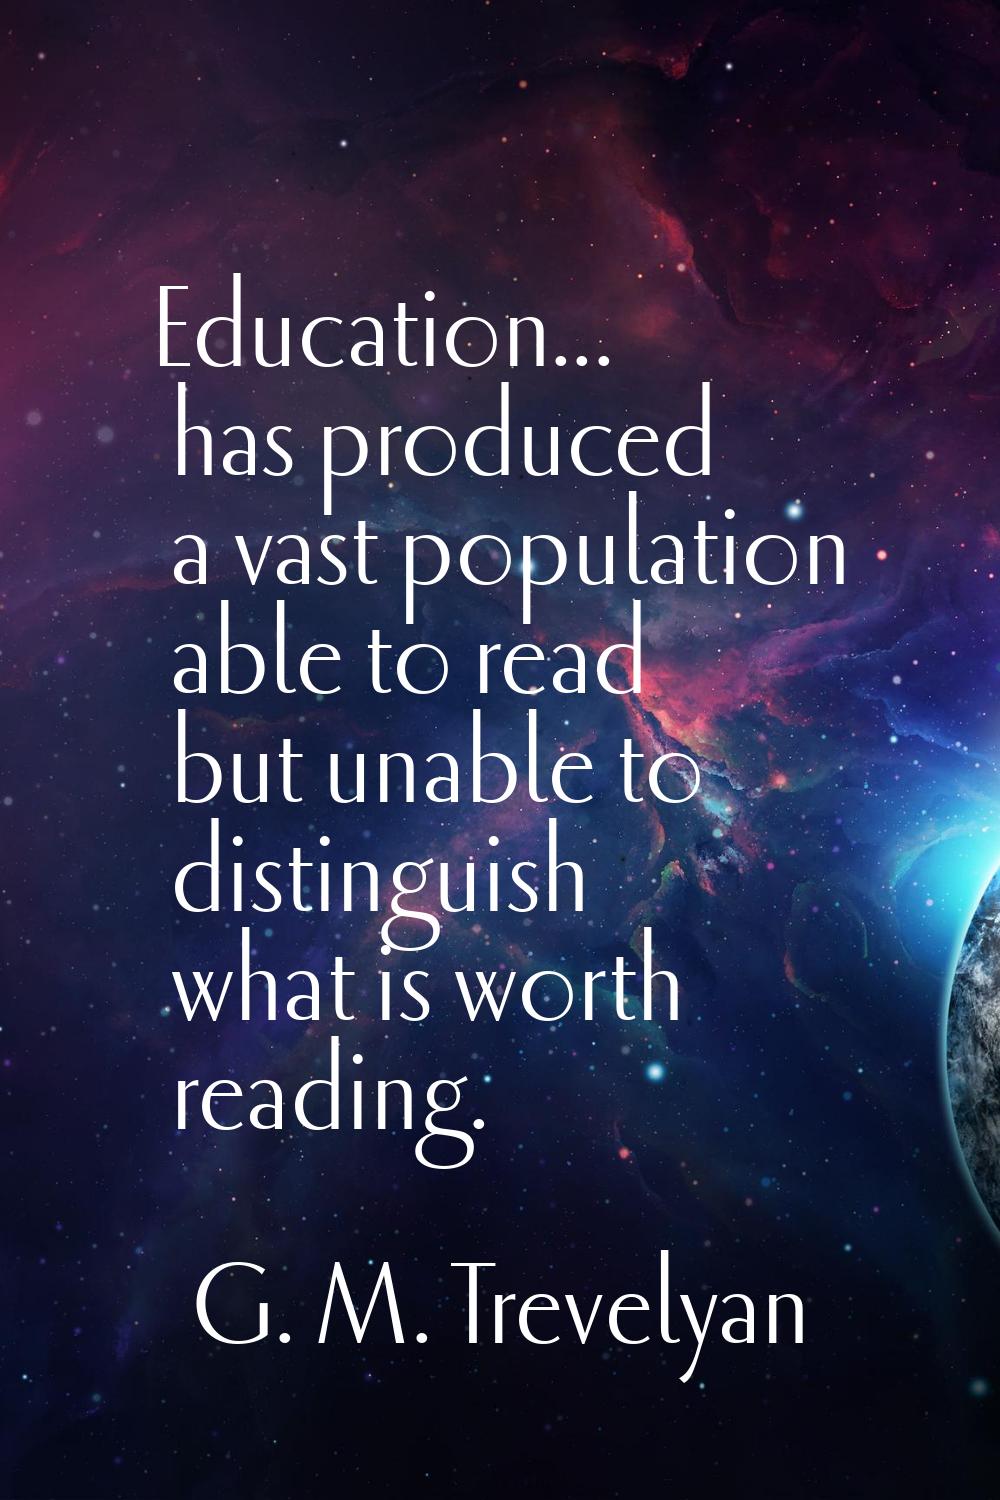 Education... has produced a vast population able to read but unable to distinguish what is worth re